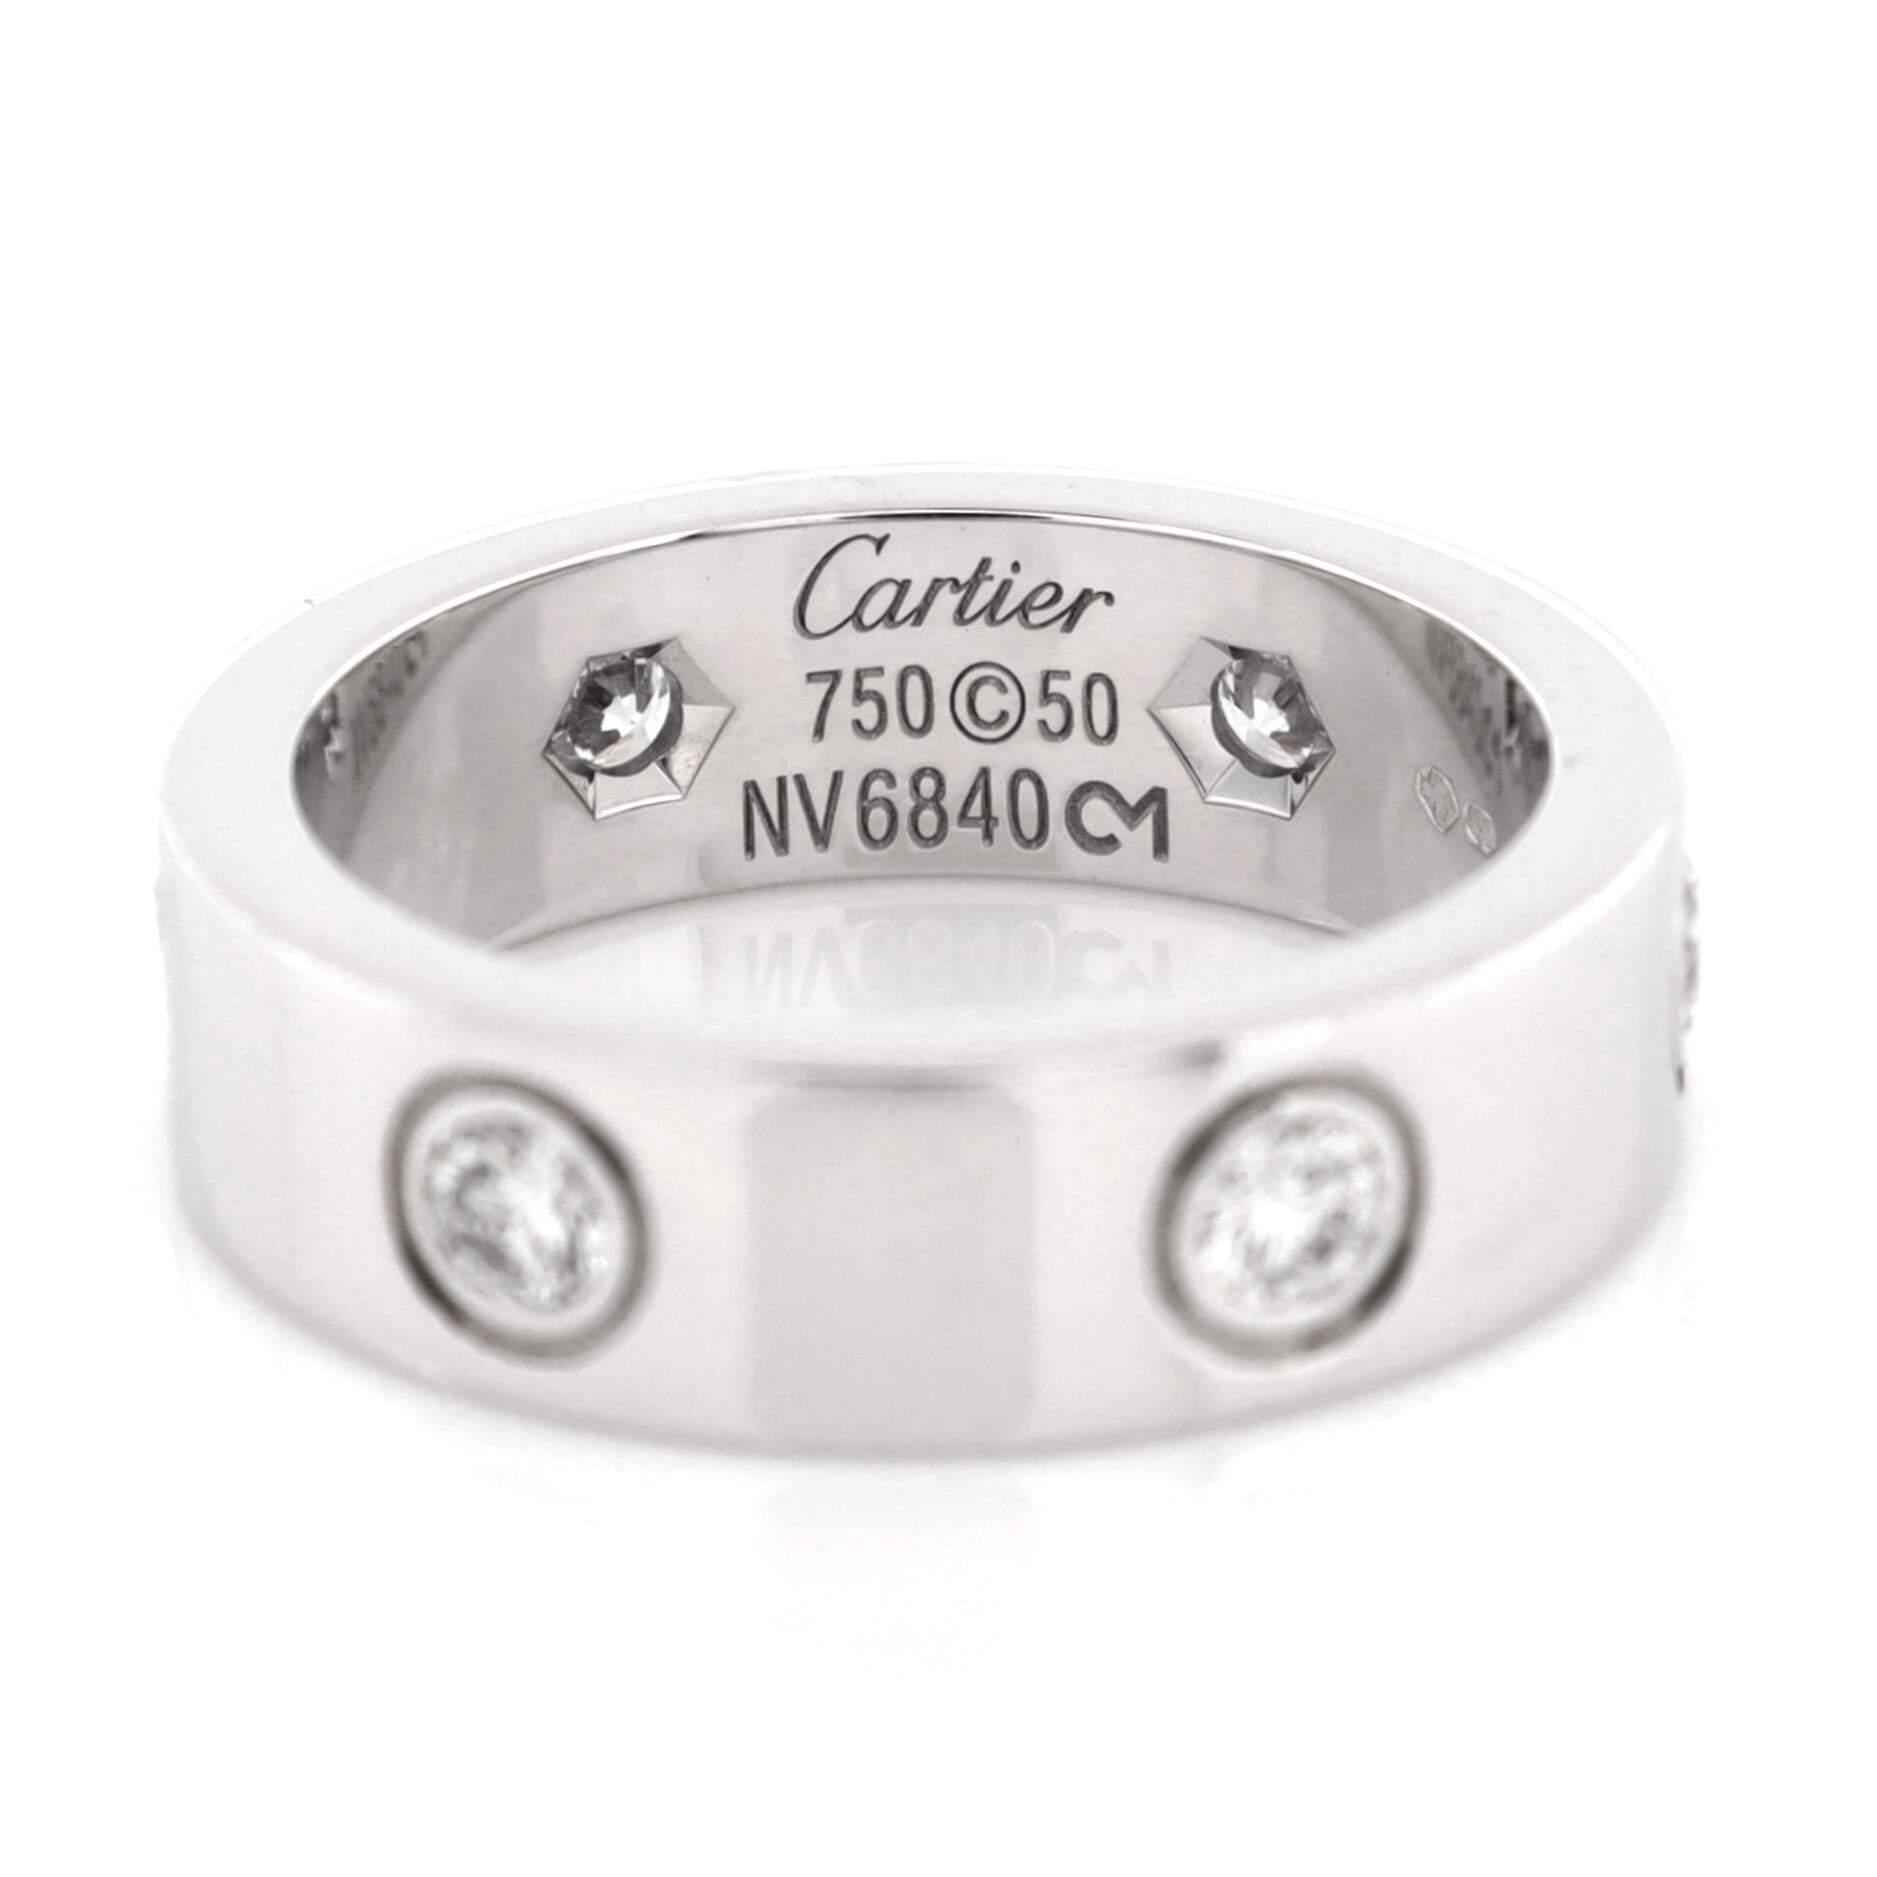 Women's or Men's Cartier Love Band 6 Diamonds Ring 18K White Gold with Diamonds For Sale